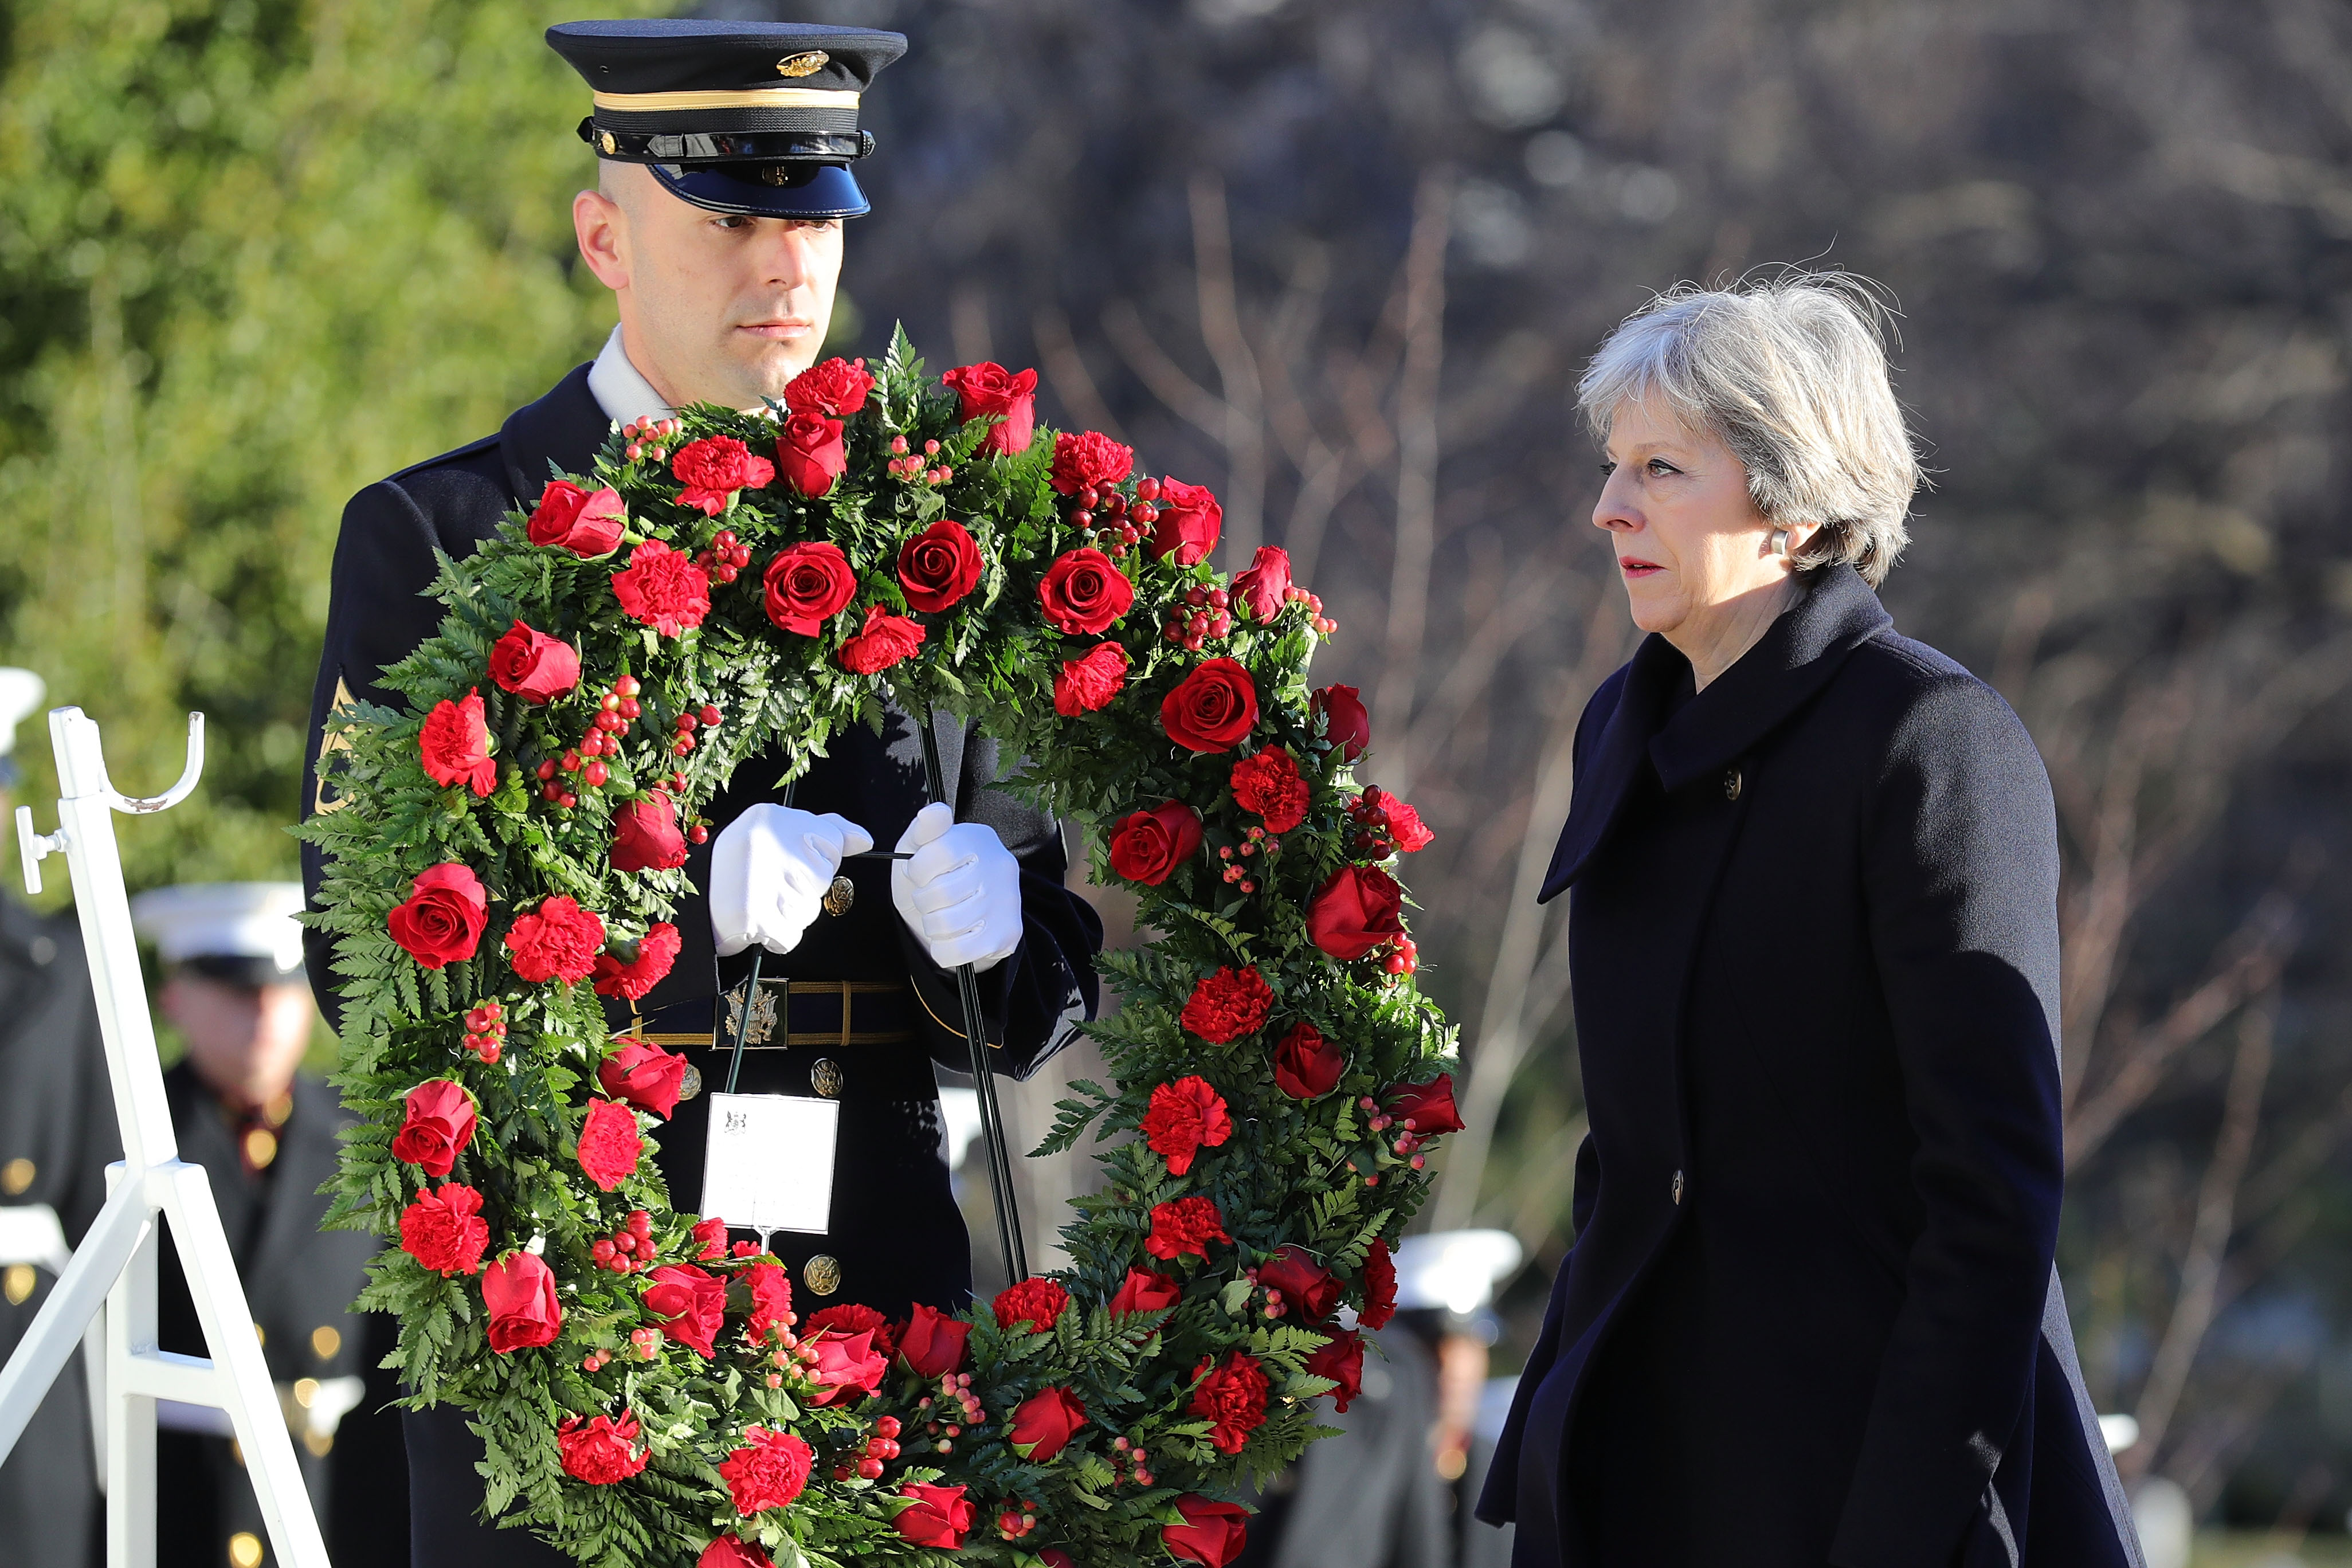 Prime Minister Theresa May Lays Wreath At Tomb Of Unknown Soldier In Arlington National Cemetery